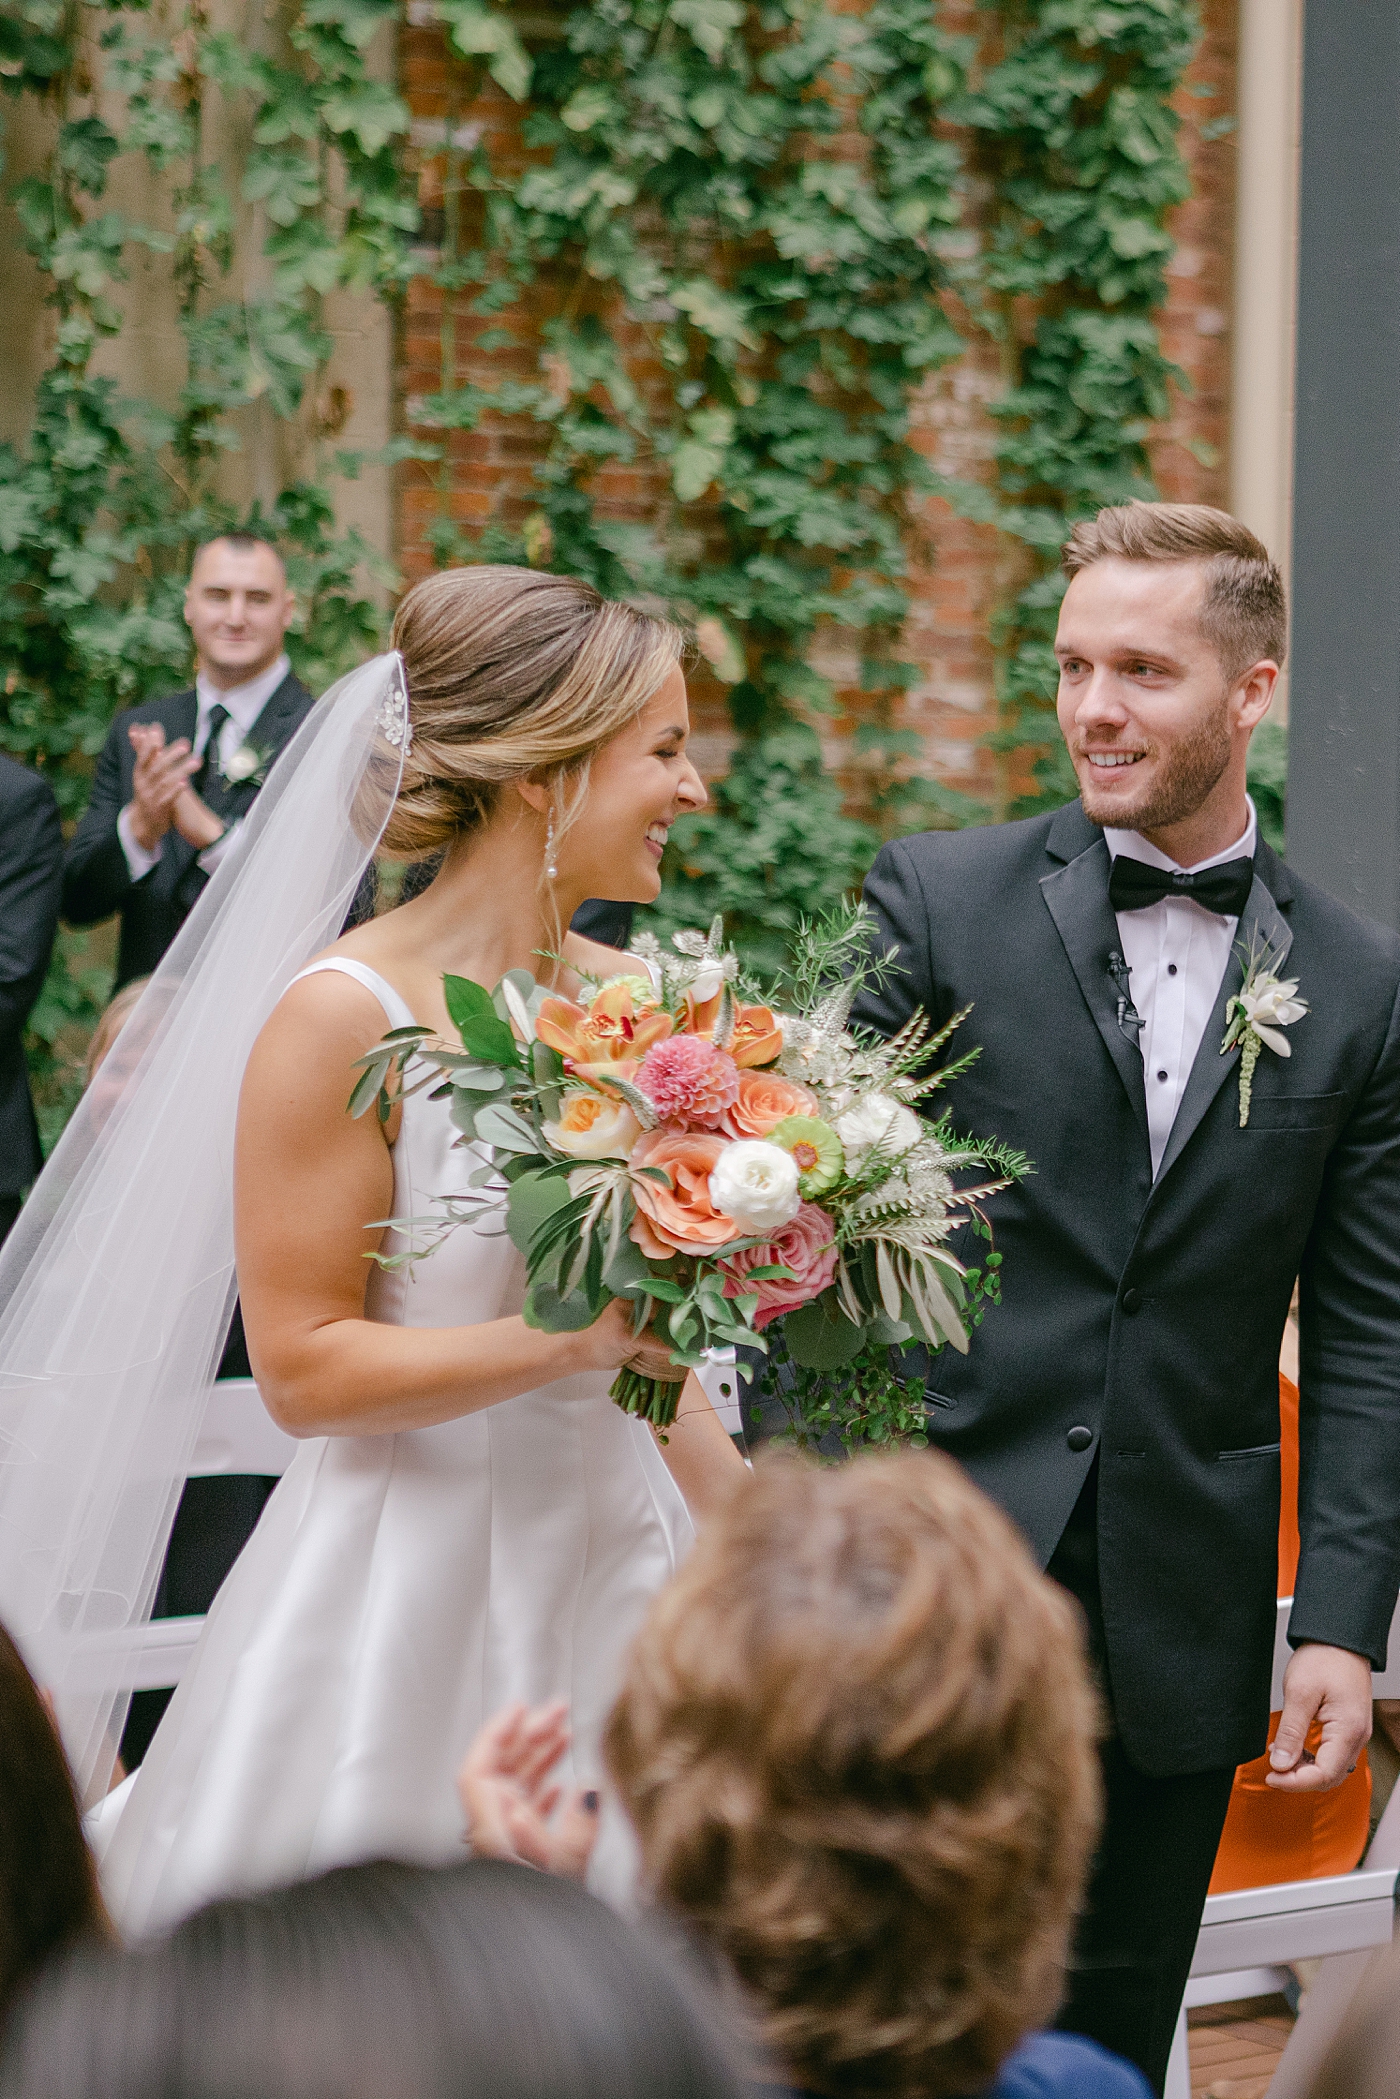 Bride and groom smiling as they leave their wedding | Photo by Hope Helmuth Photography